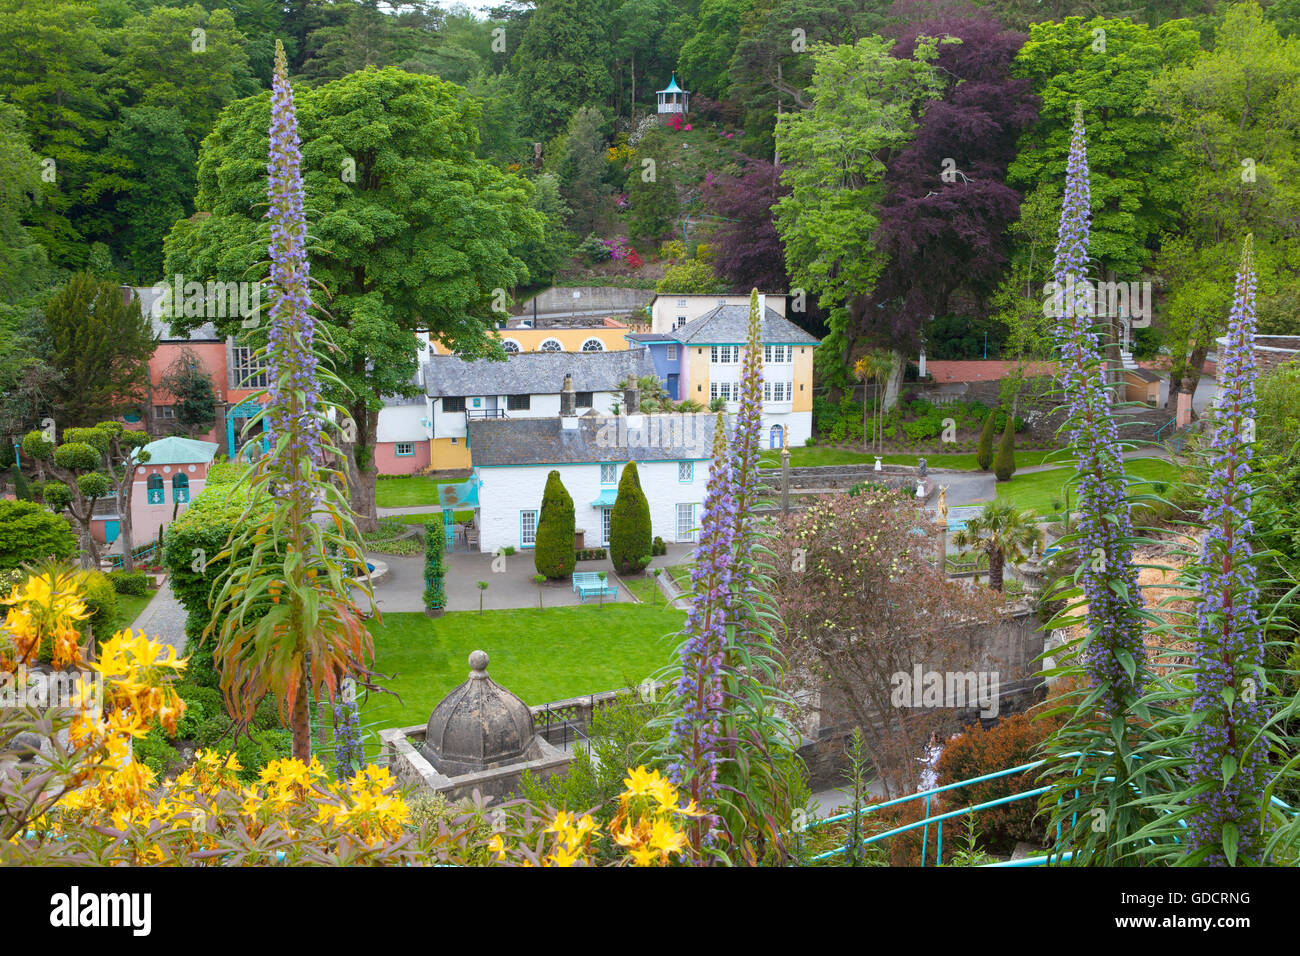 Portmeirion overview, Gwynedd, North Wales, with the Piazza, Mermaid, Neptune and the Town Hall in view. Stock Photo